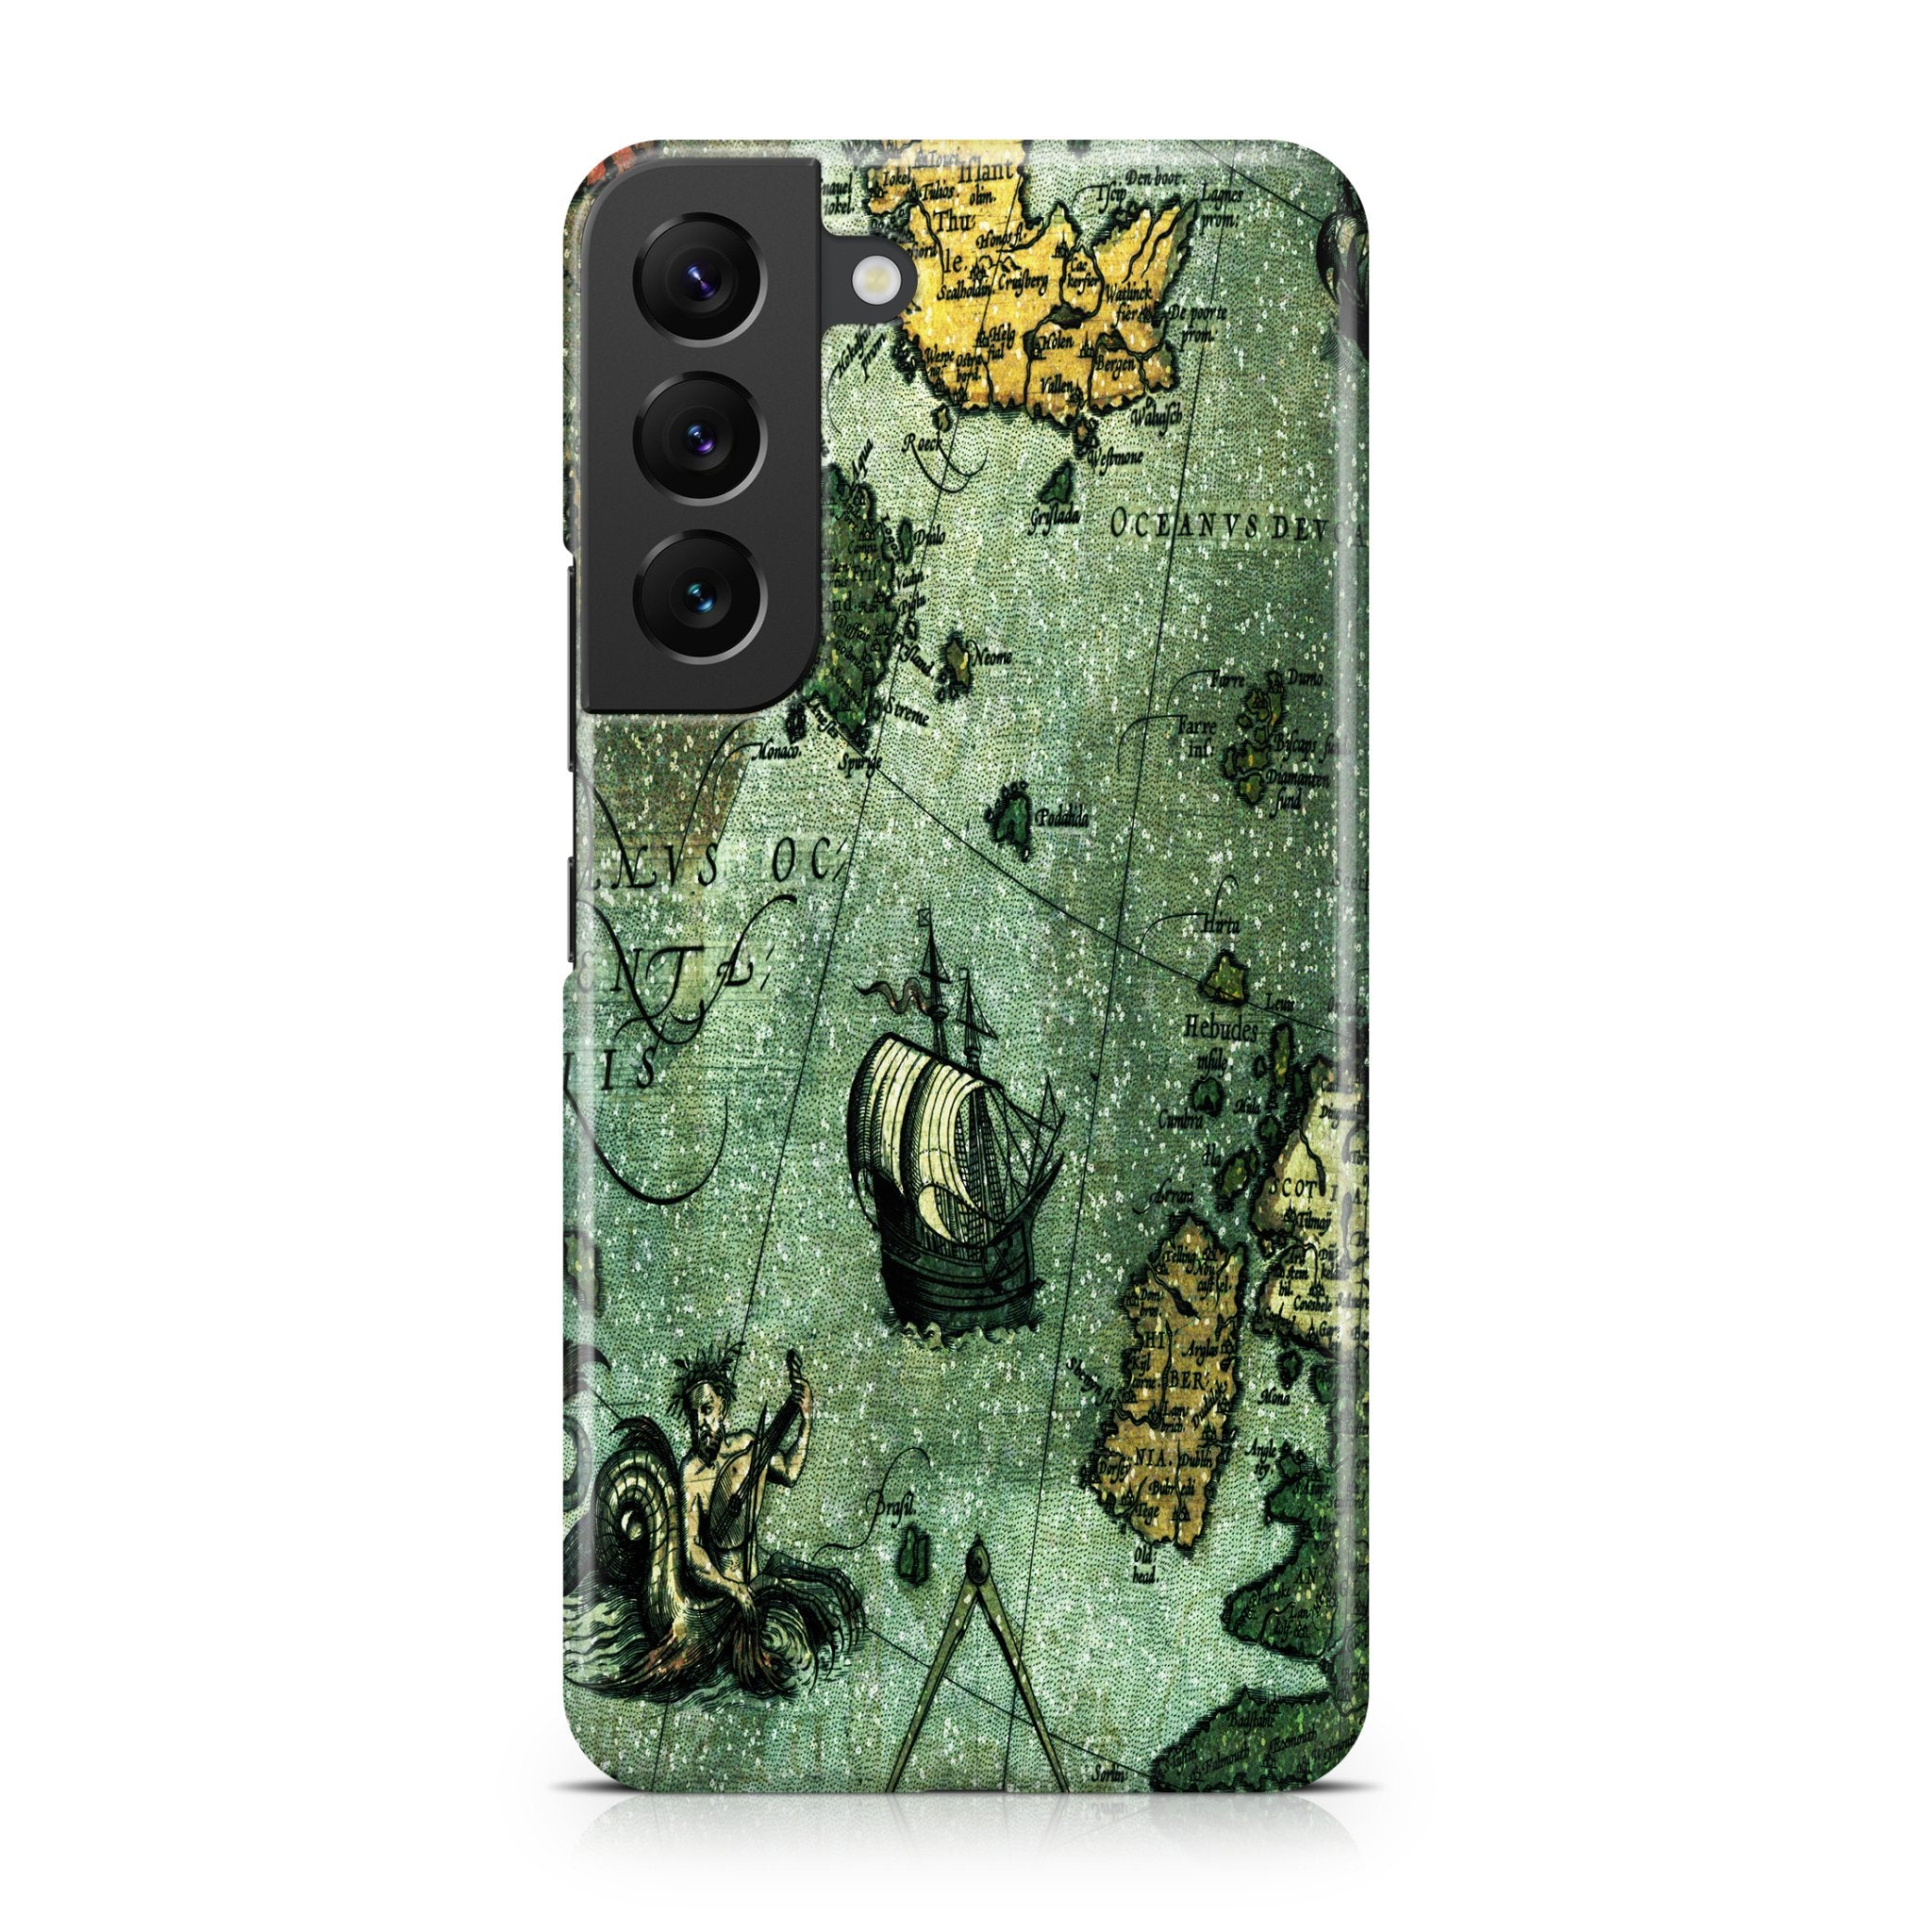 Ancient Water - Samsung phone case designs by CaseSwagger